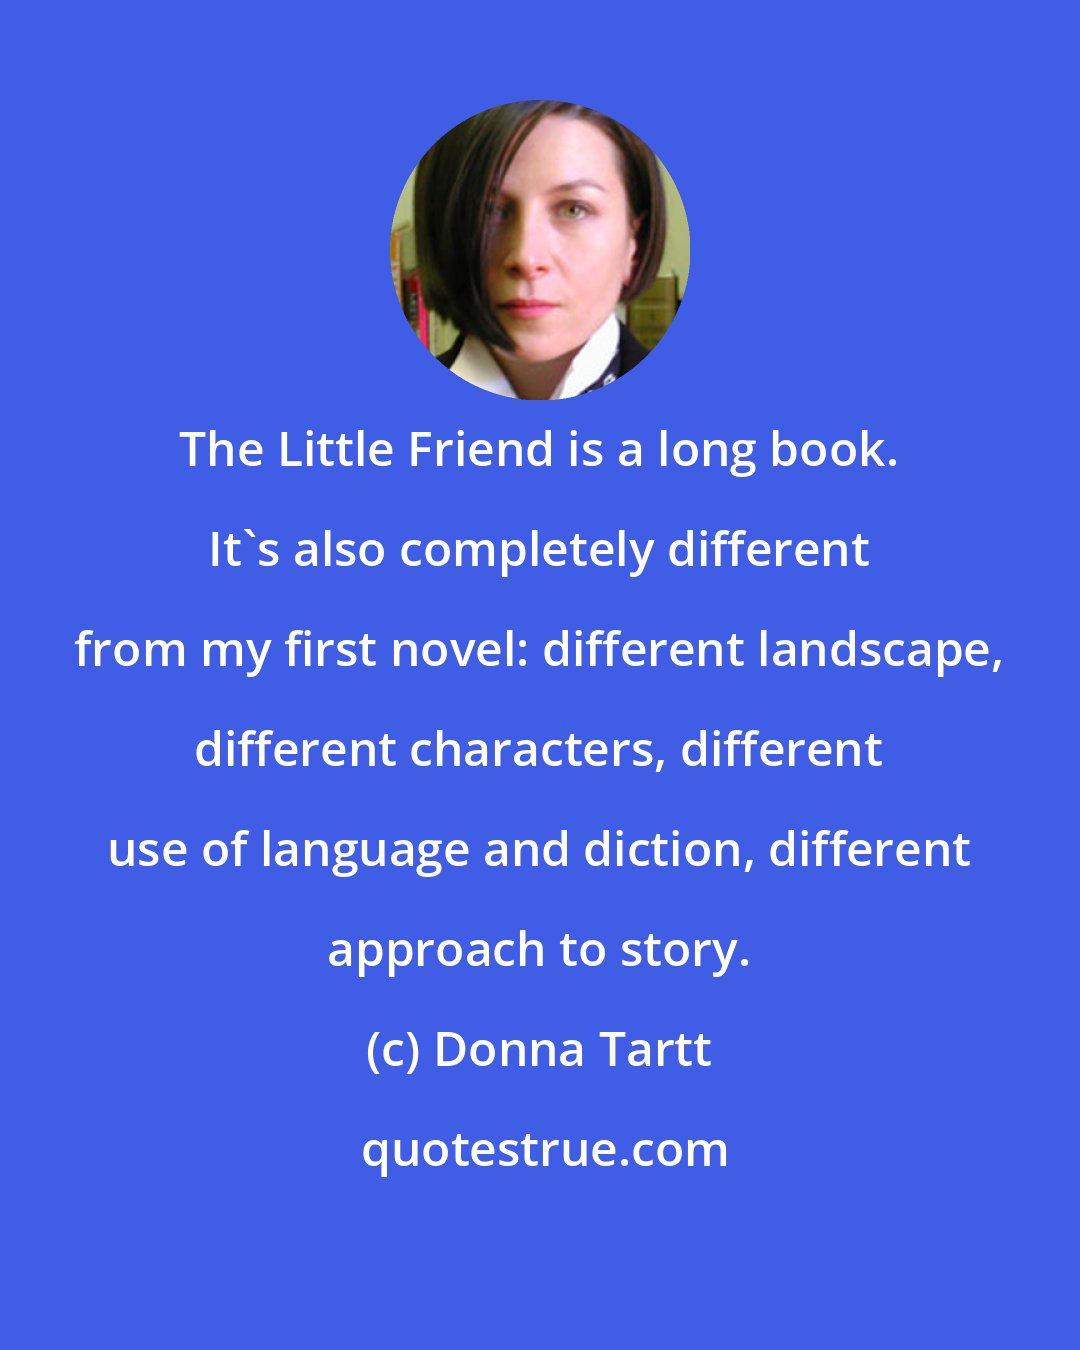 Donna Tartt: The Little Friend is a long book. It's also completely different from my first novel: different landscape, different characters, different use of language and diction, different approach to story.